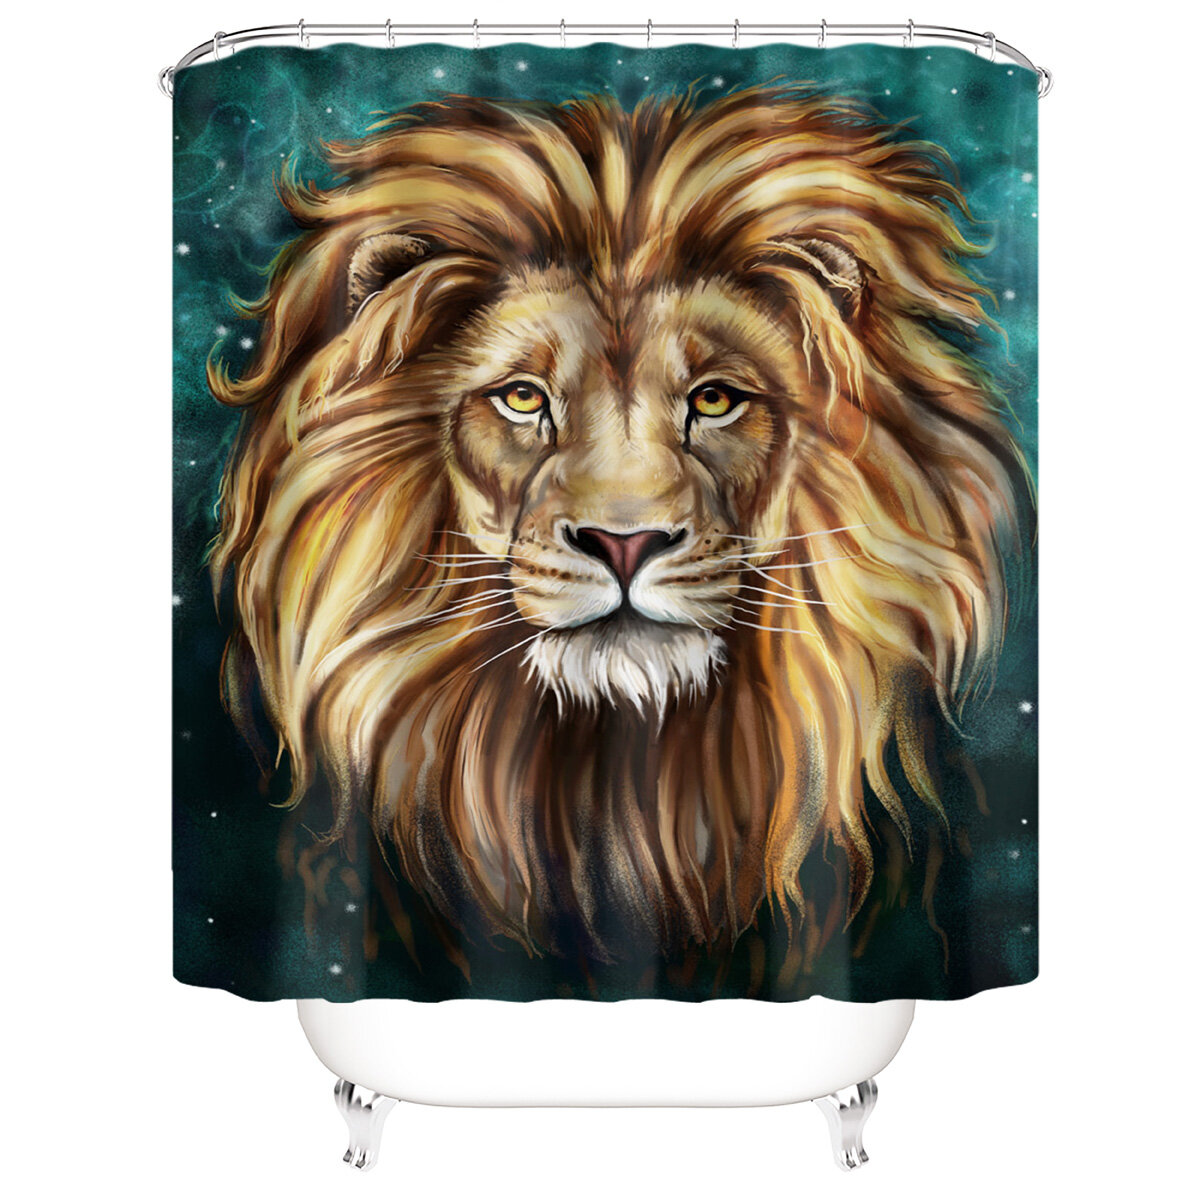 

Waterproof Lion Head Printed Shower Curtain Polyester Bathroom Toilet Seat Cover Rug Bath Mat